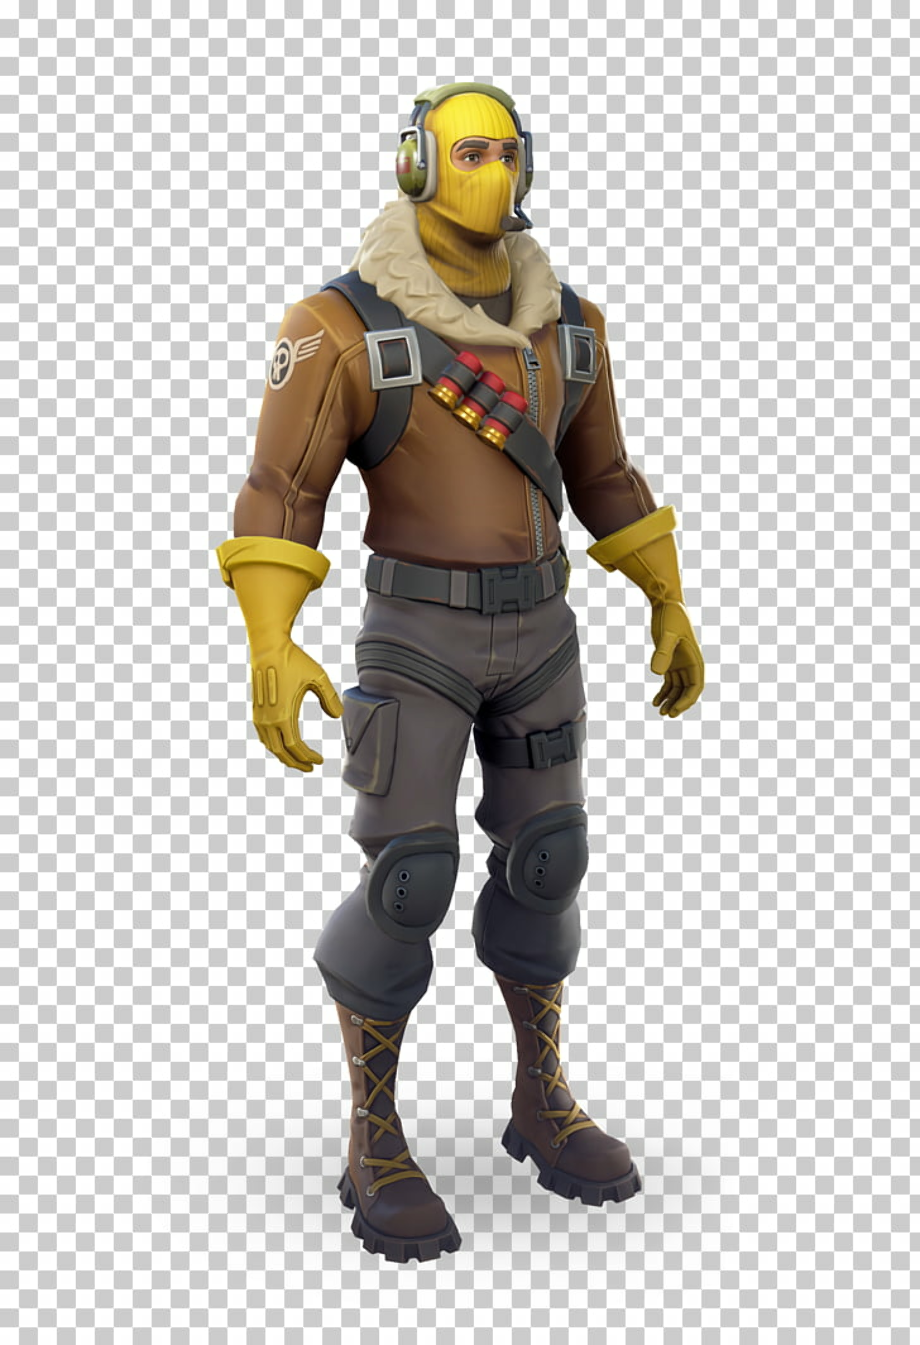 Download High Quality fortnite clipart character Transparent PNG Images